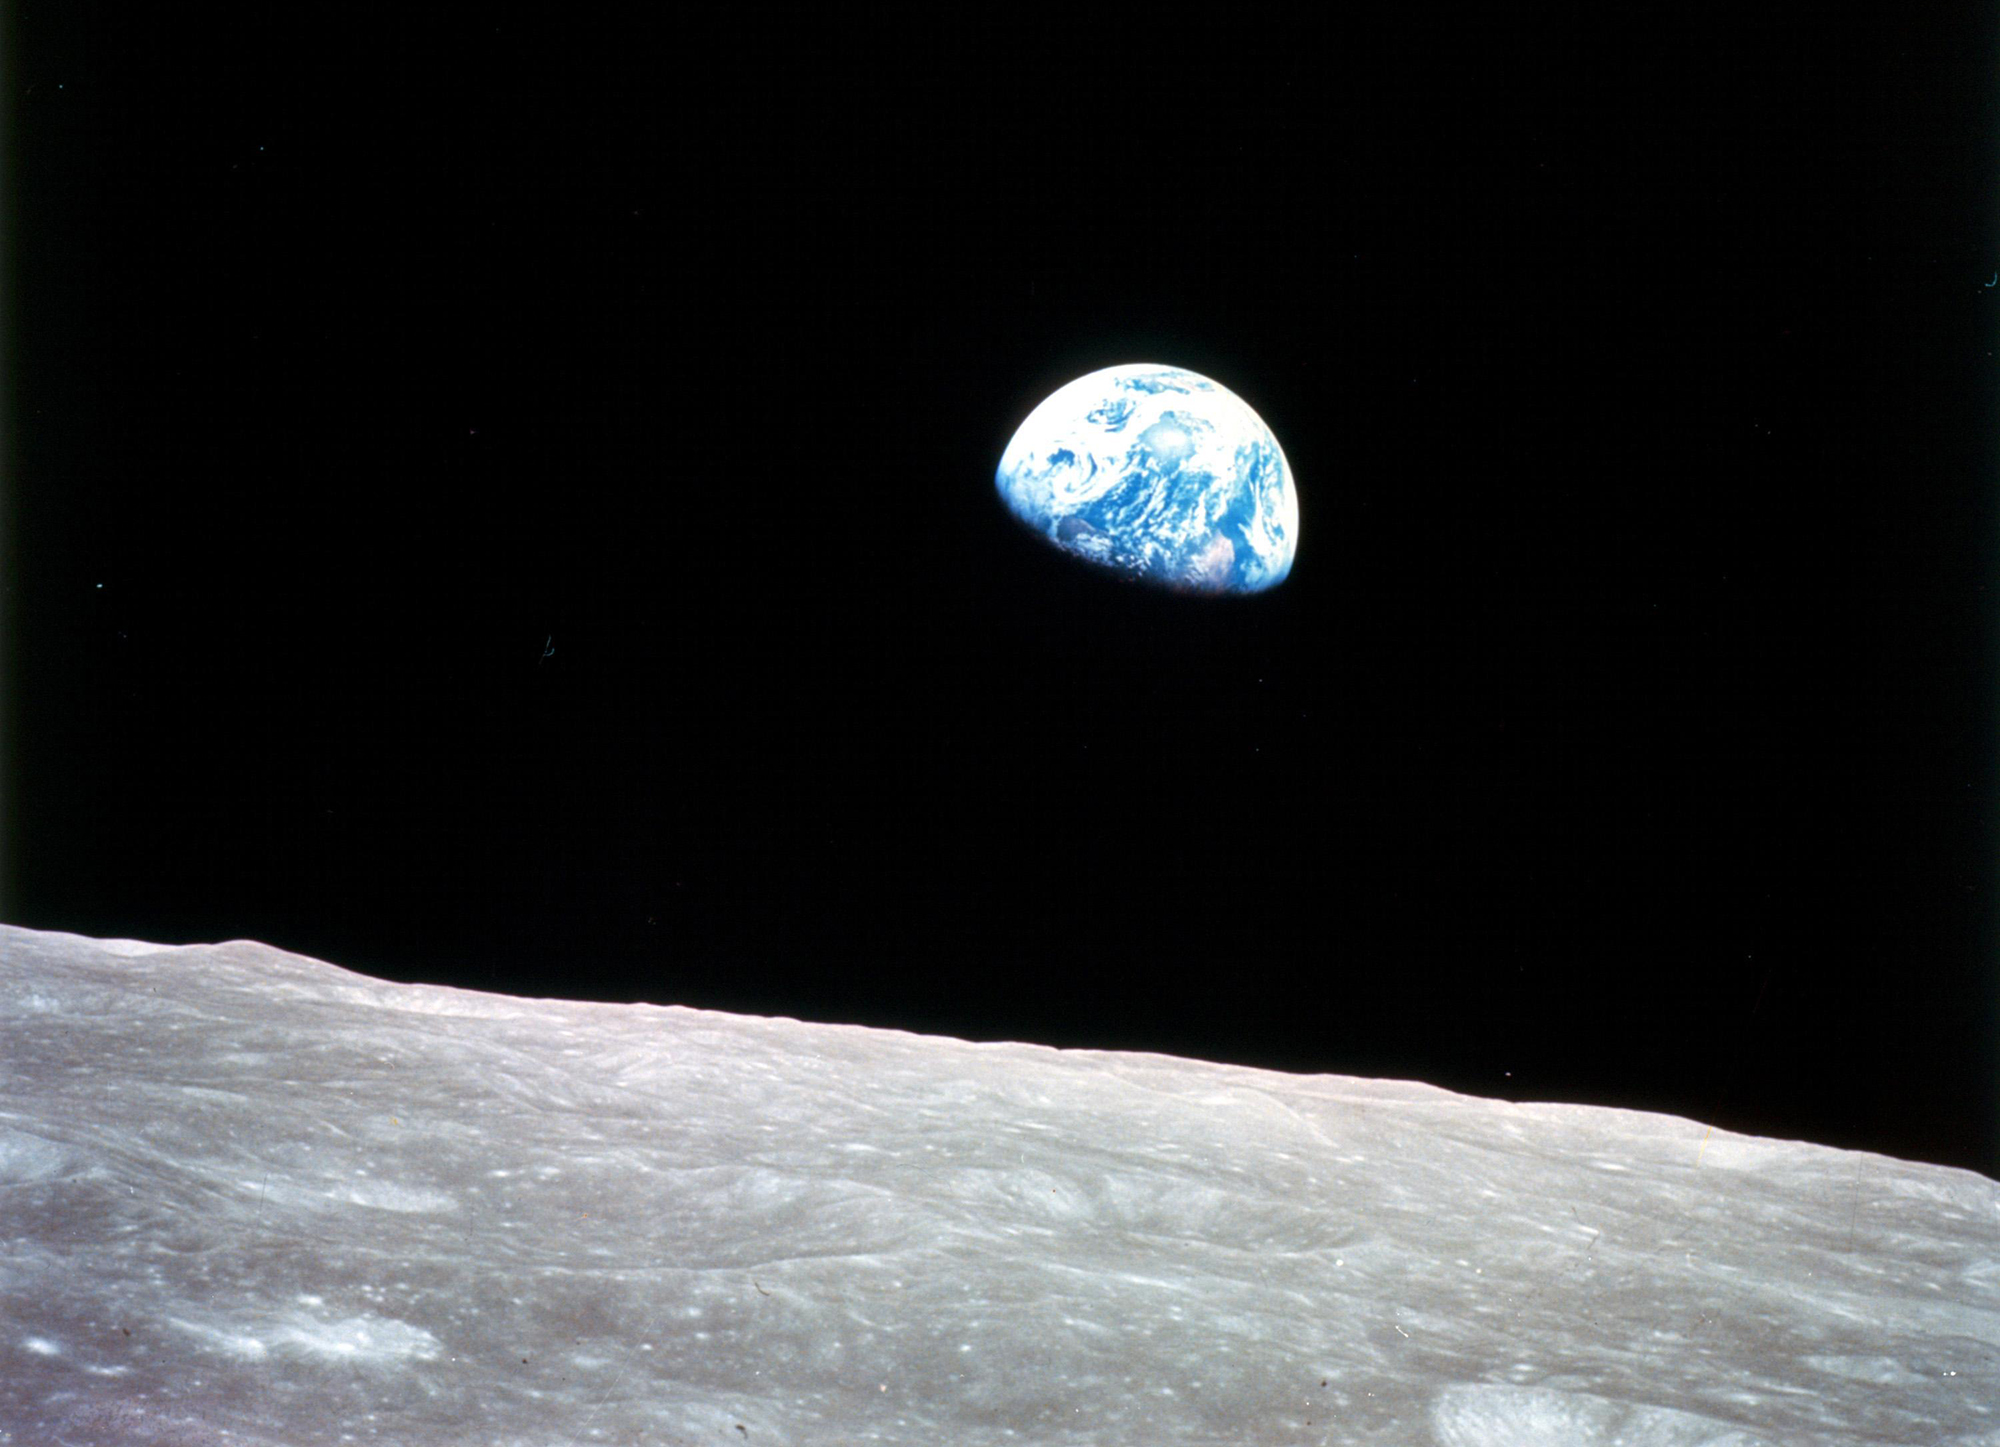 Earth seen from the moon